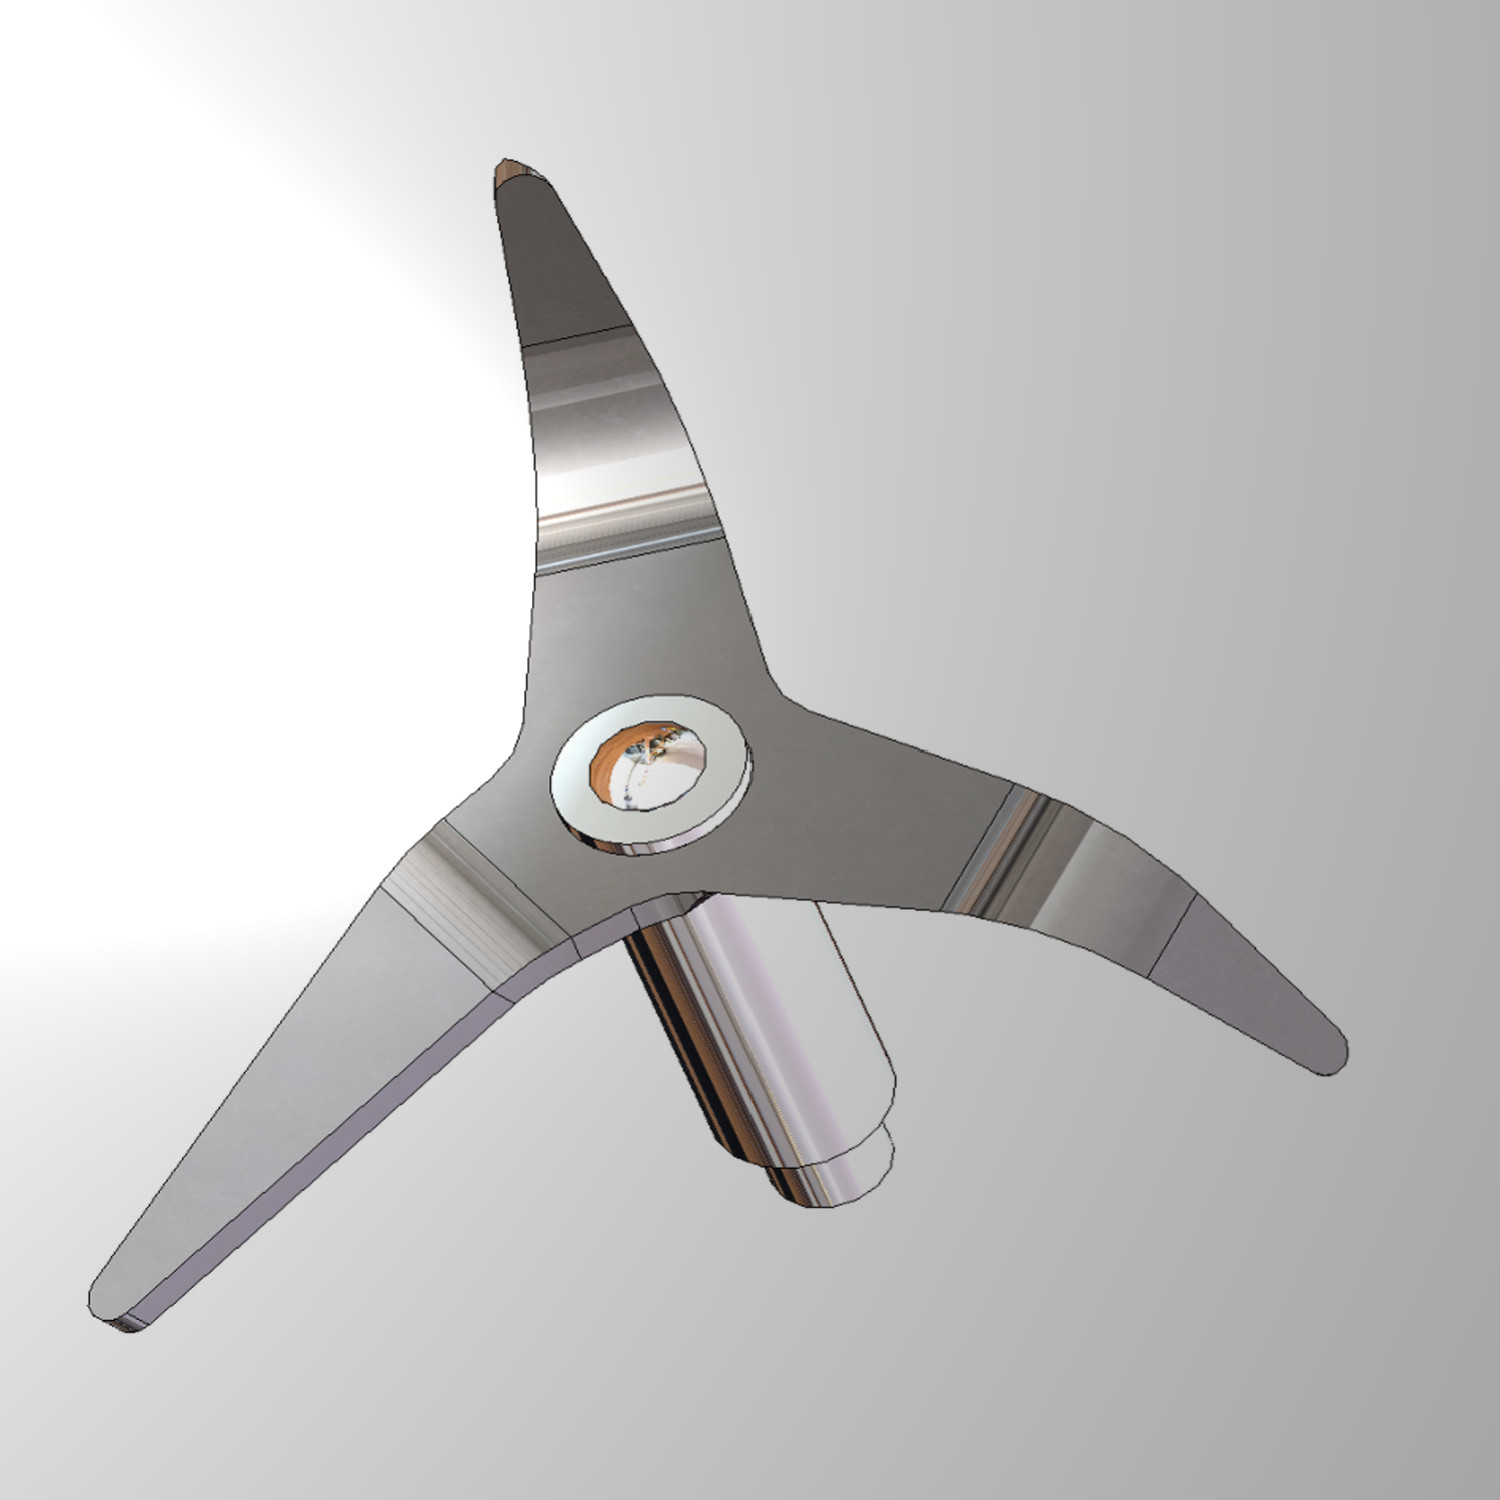 Blender blades for blenders and mixers